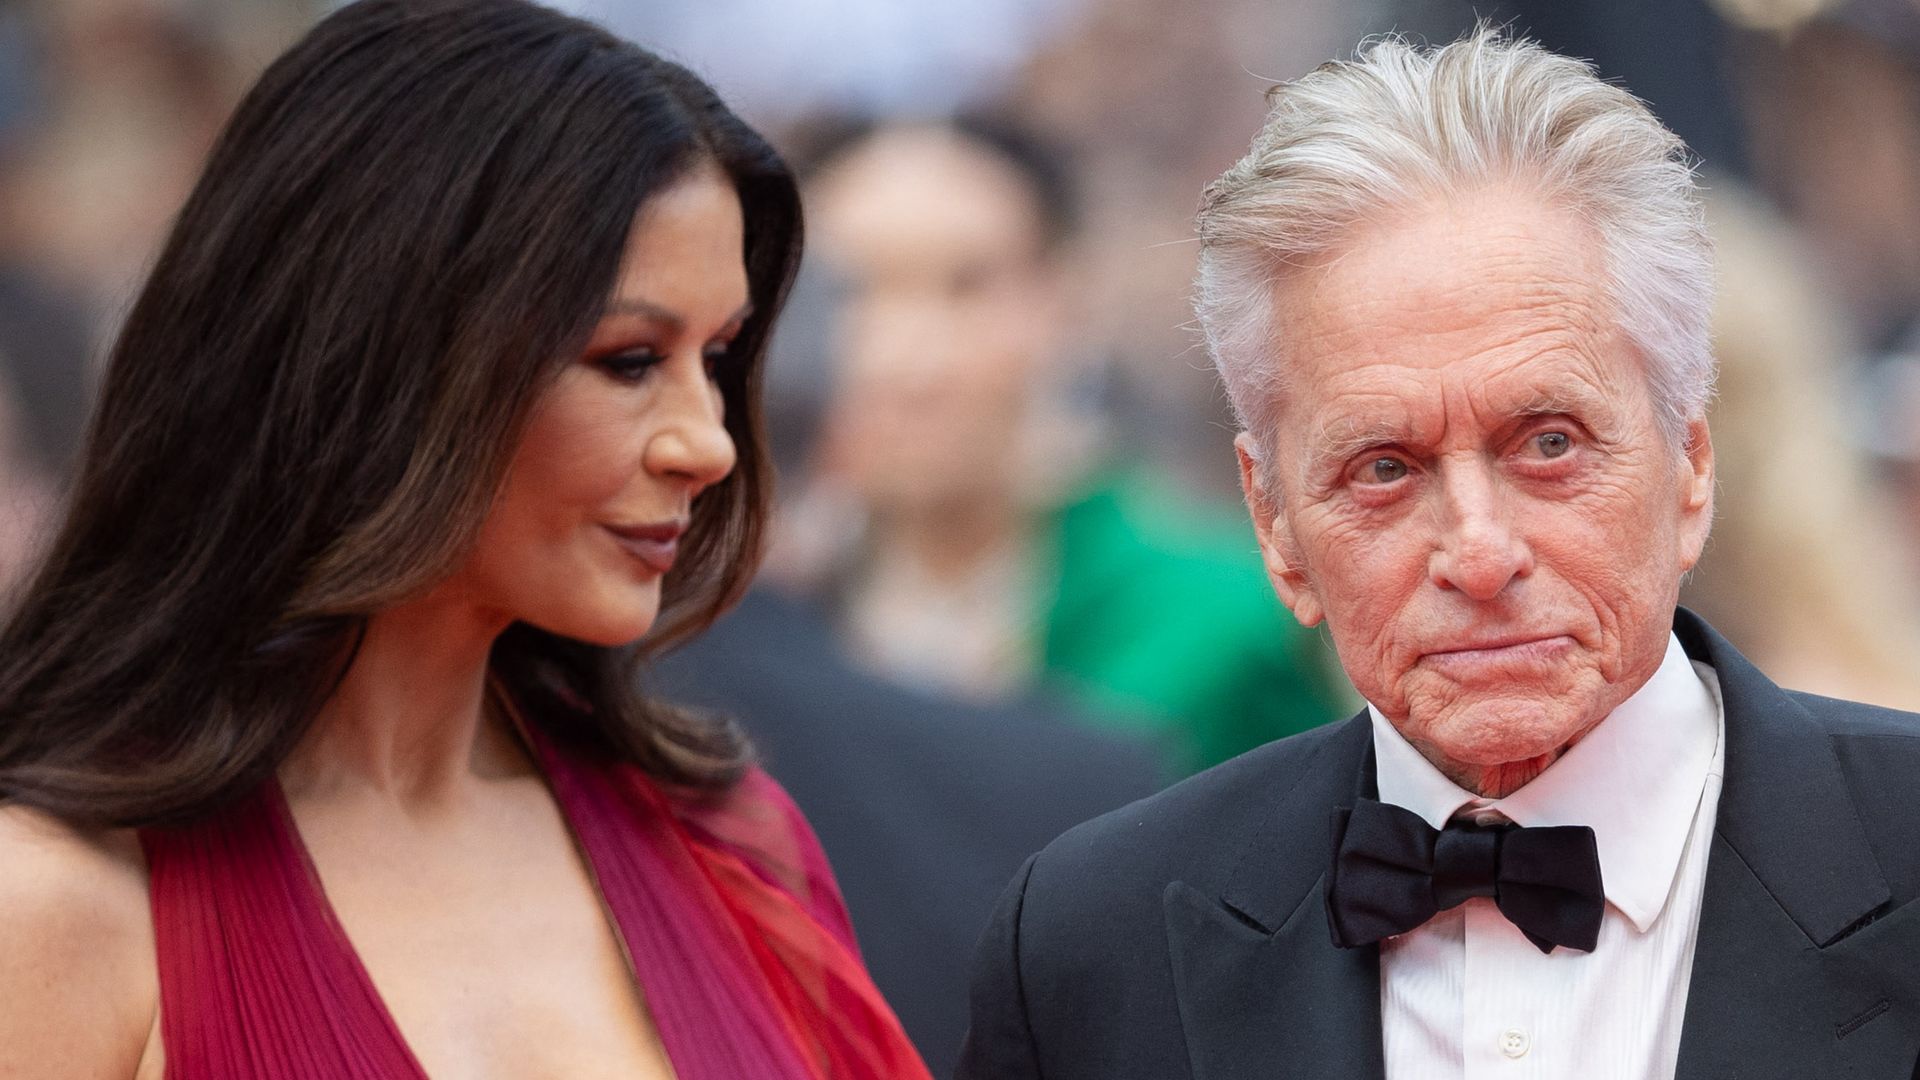 Catherine Zeta-Jones in a red dress with her husband Michael Douglas on the red carpet